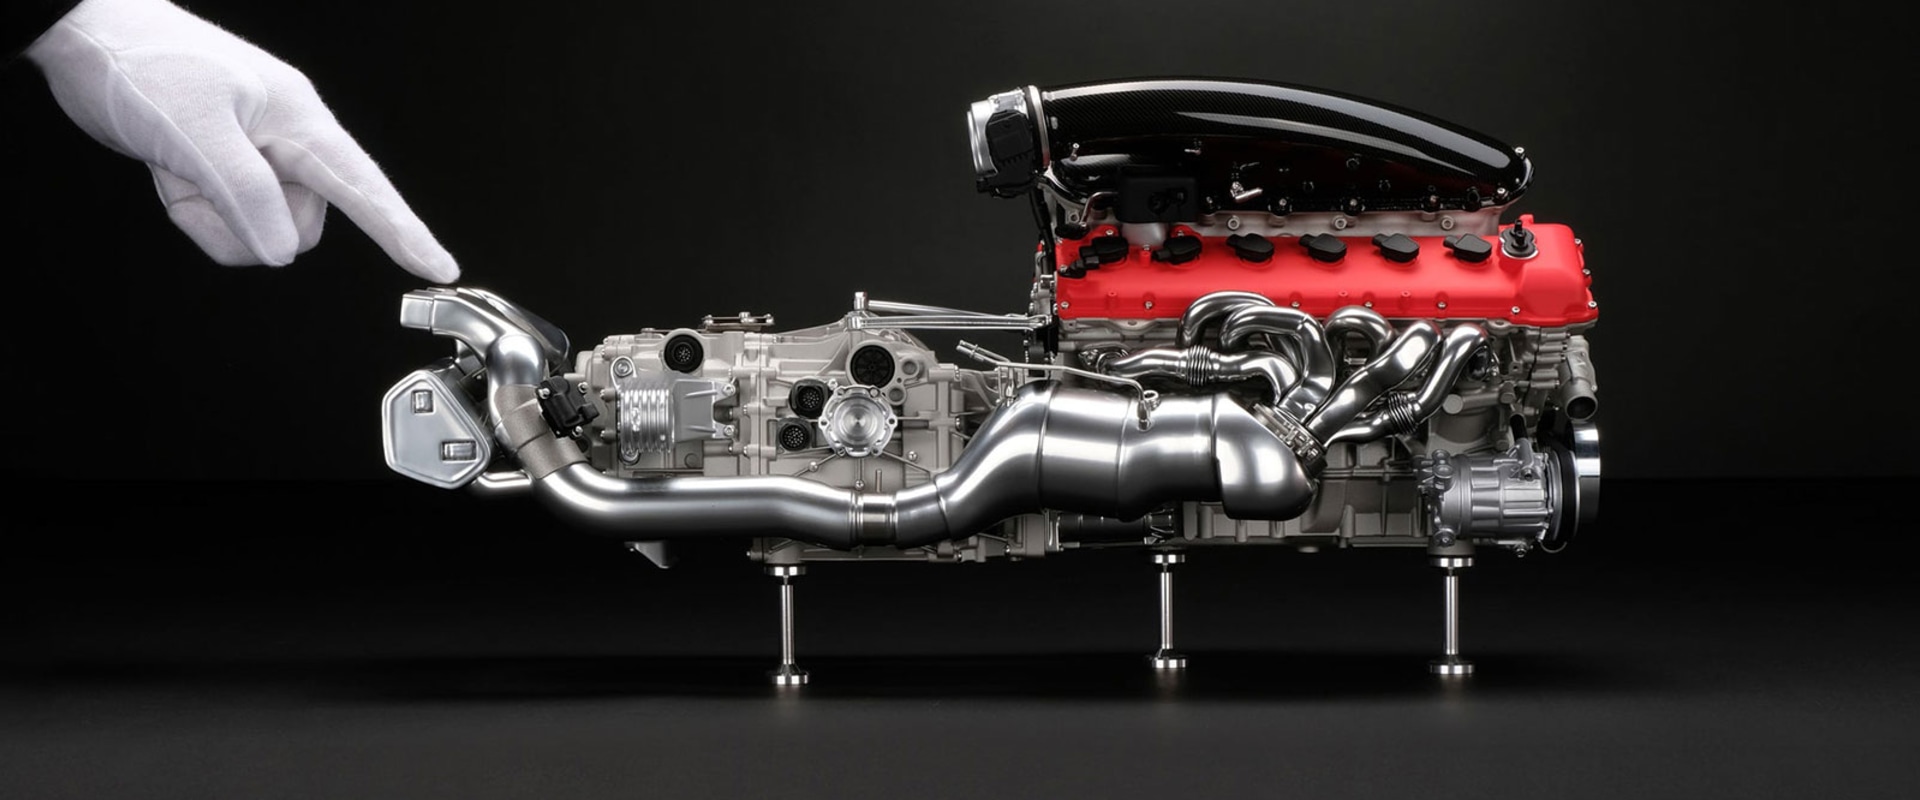 Discover the World of Replica Engines